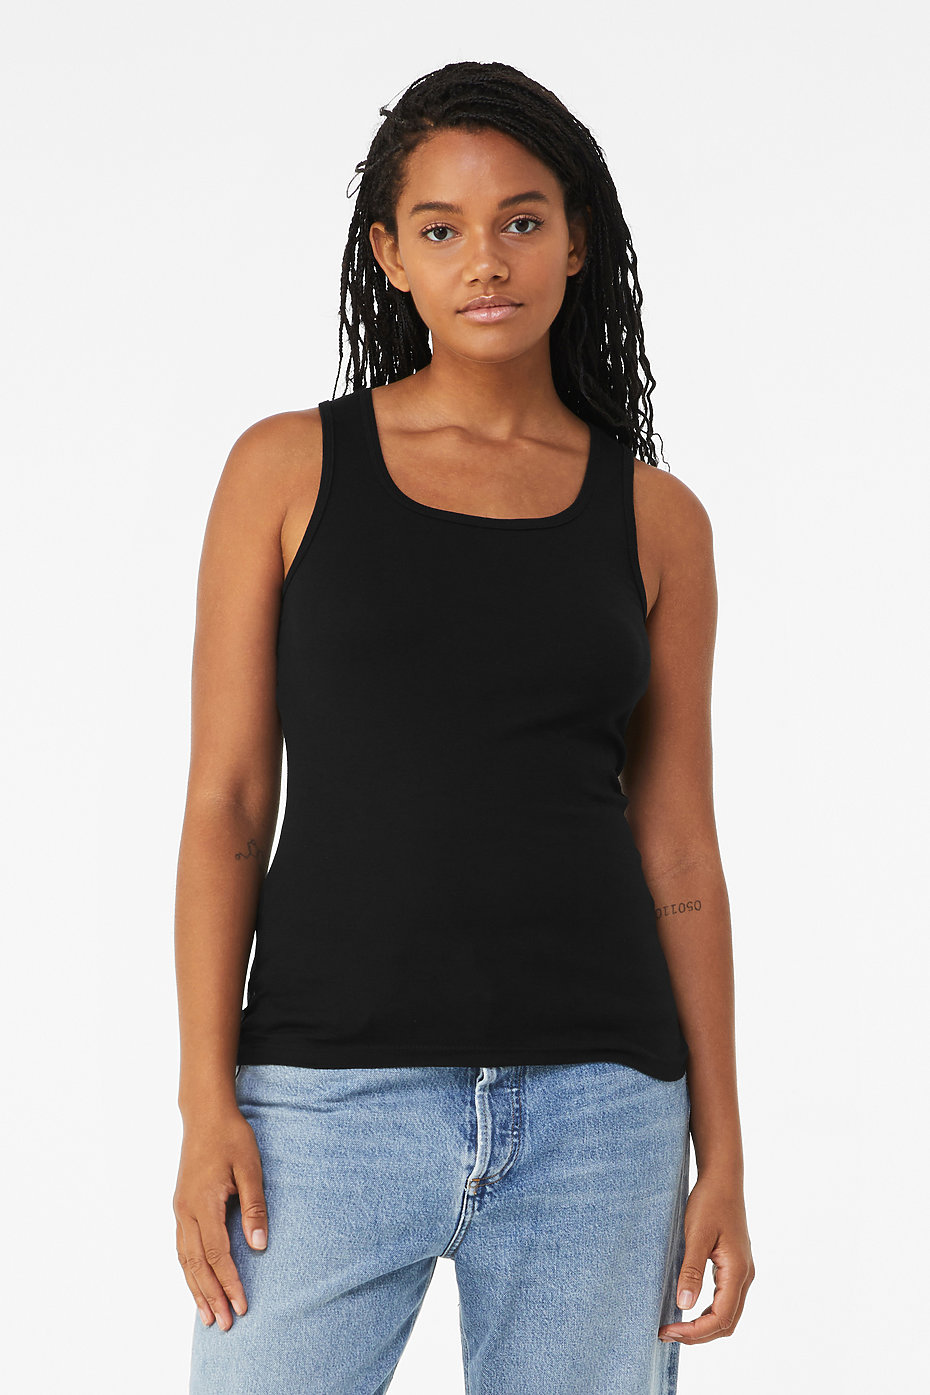 Cotton Ribbed Tank Tops for Women Slim Fit Scoop Neck Black